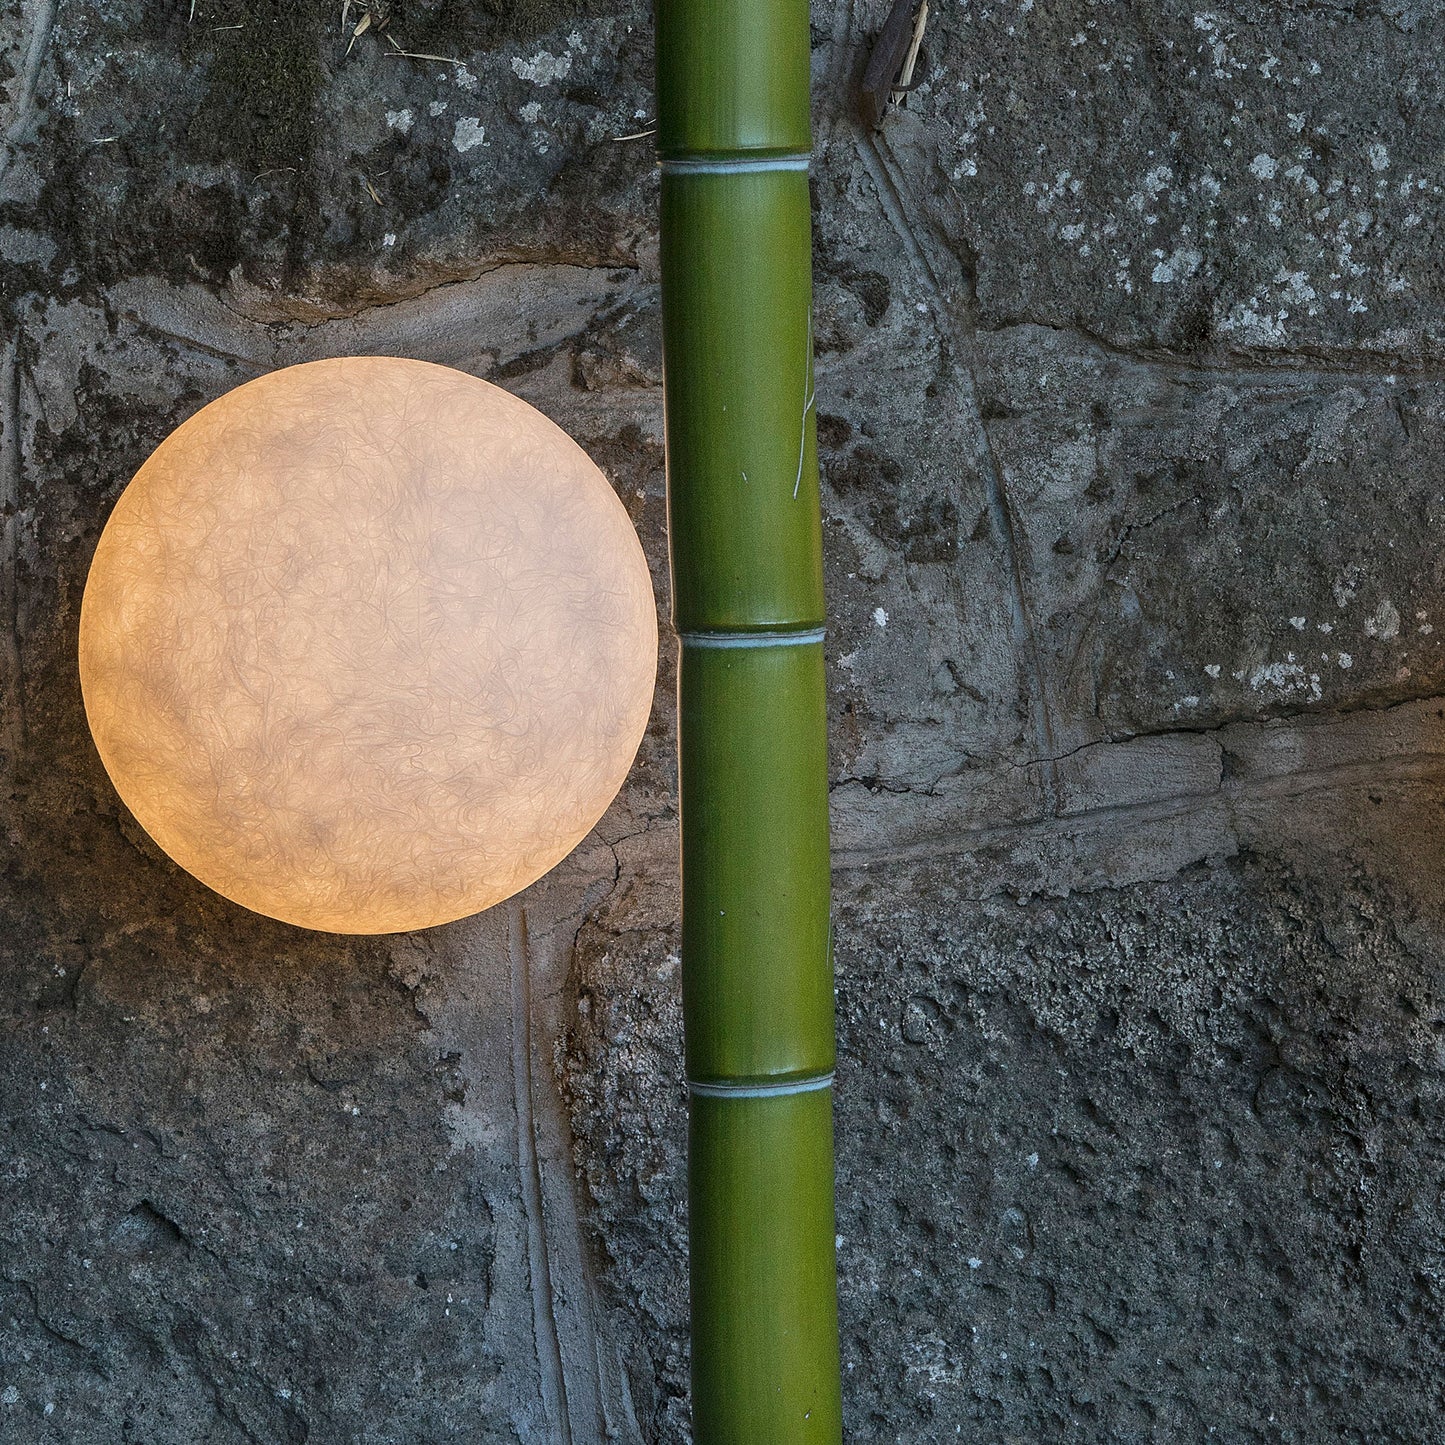 In-Es Art Design A Moon Out Wall Light